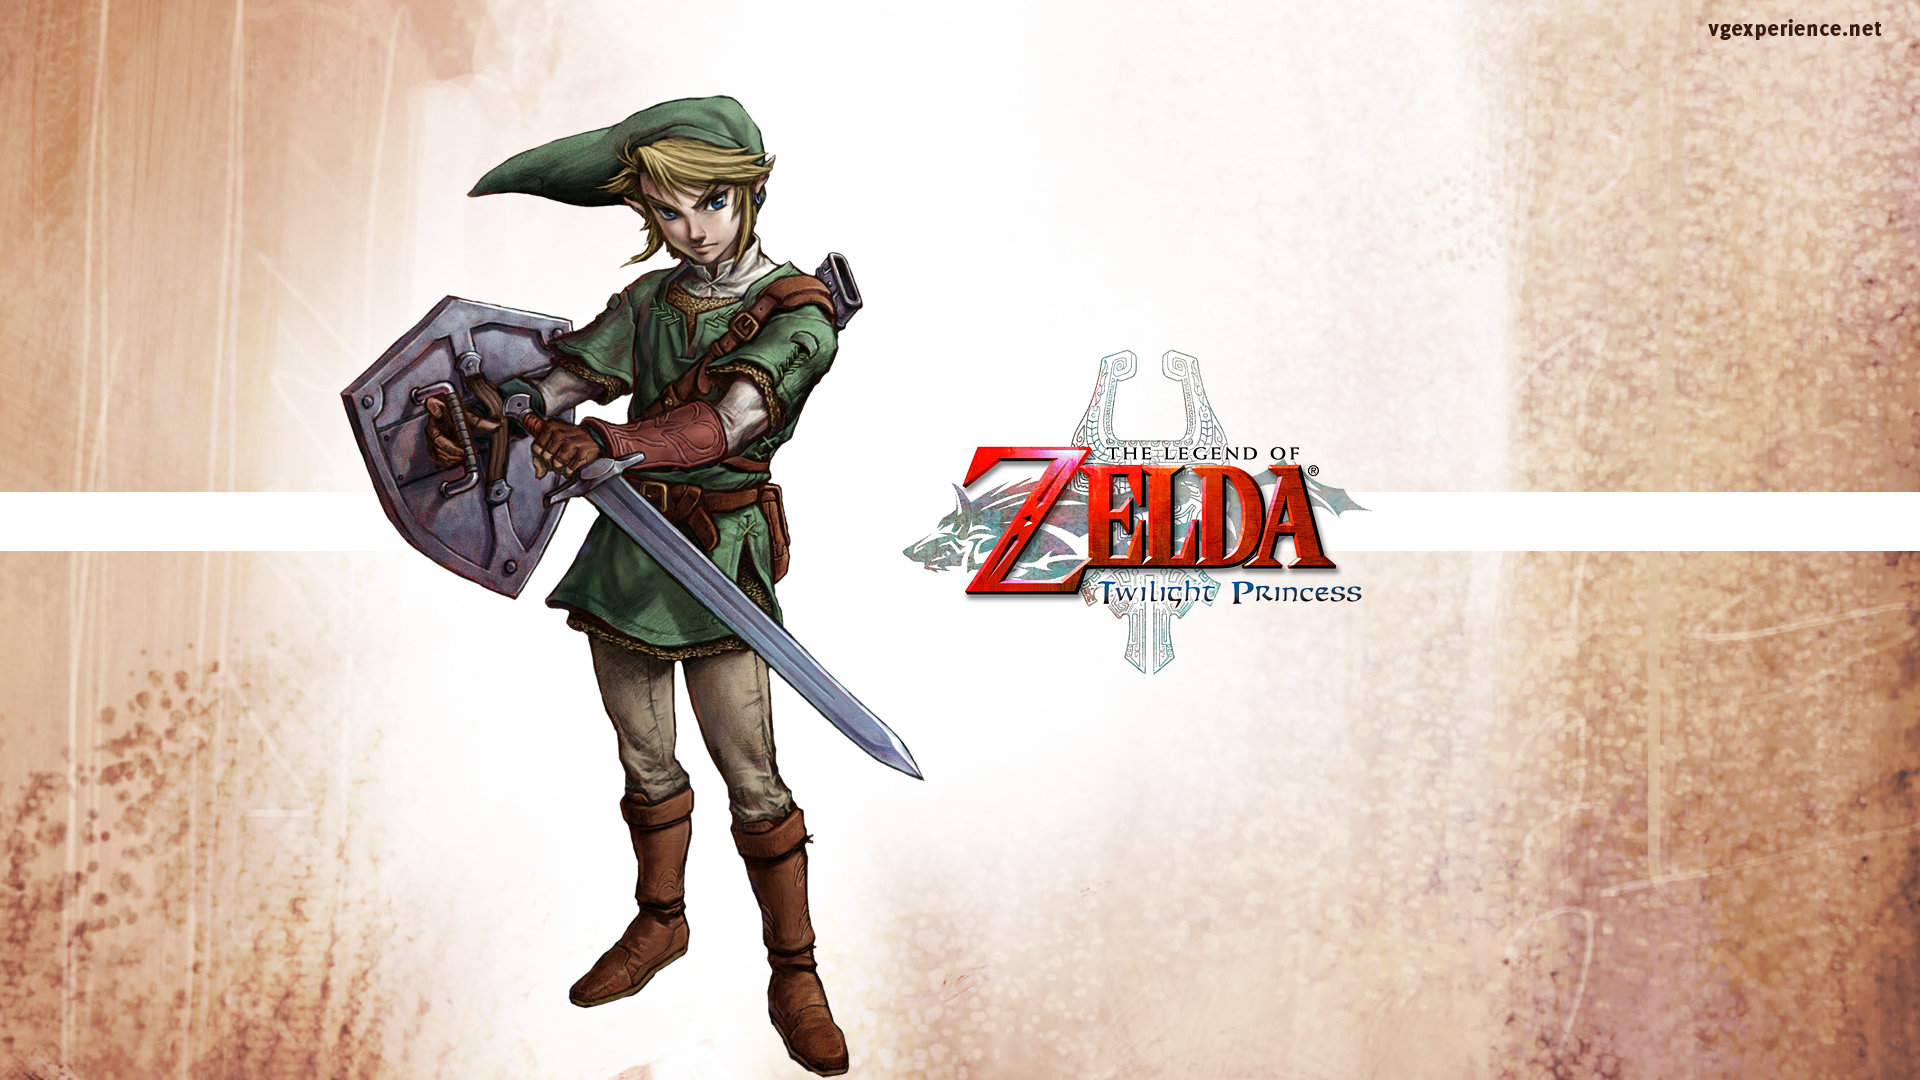 Awesome The Legend Of Zelda: Twilight Princess free wallpaper ID:293167 for full hd computer